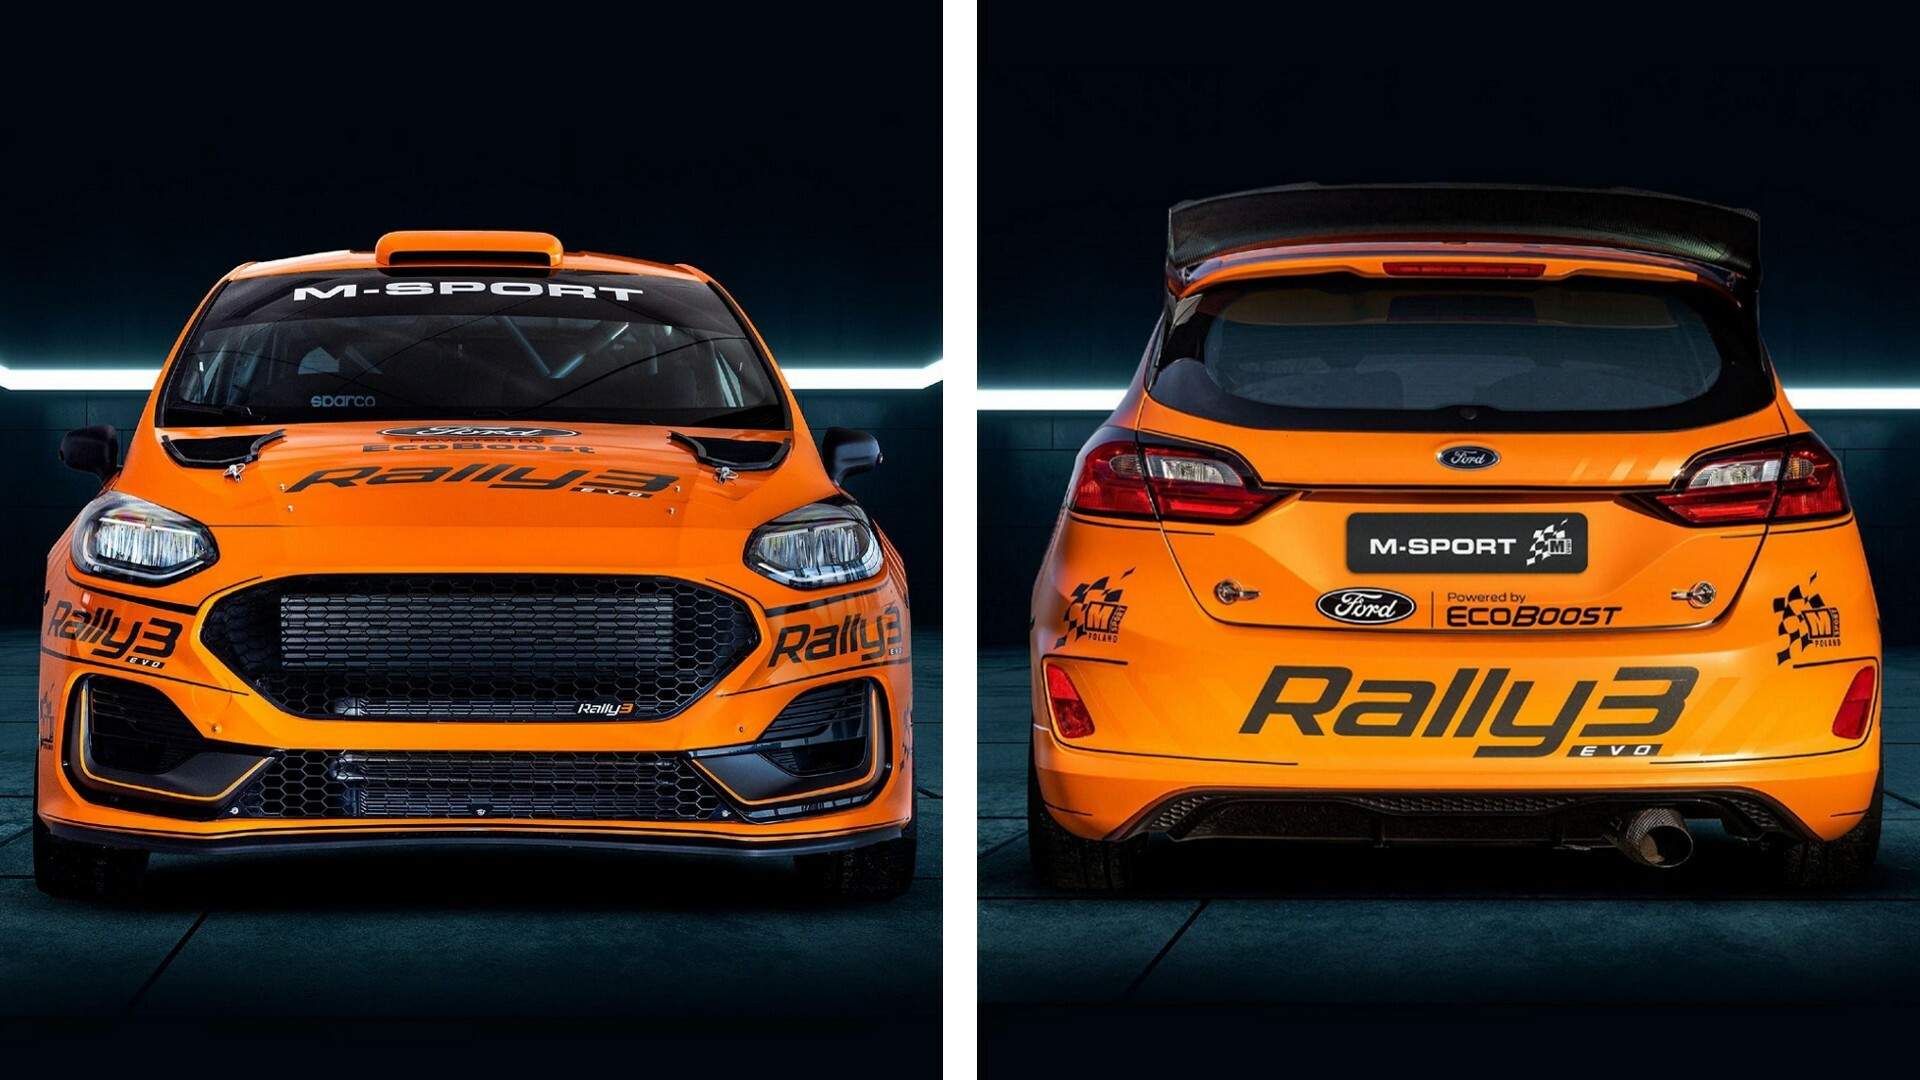 complicaciones Misterioso Viva The Ford Fiesta Might Be Dead But The Rally Car Is Not | Carscoops